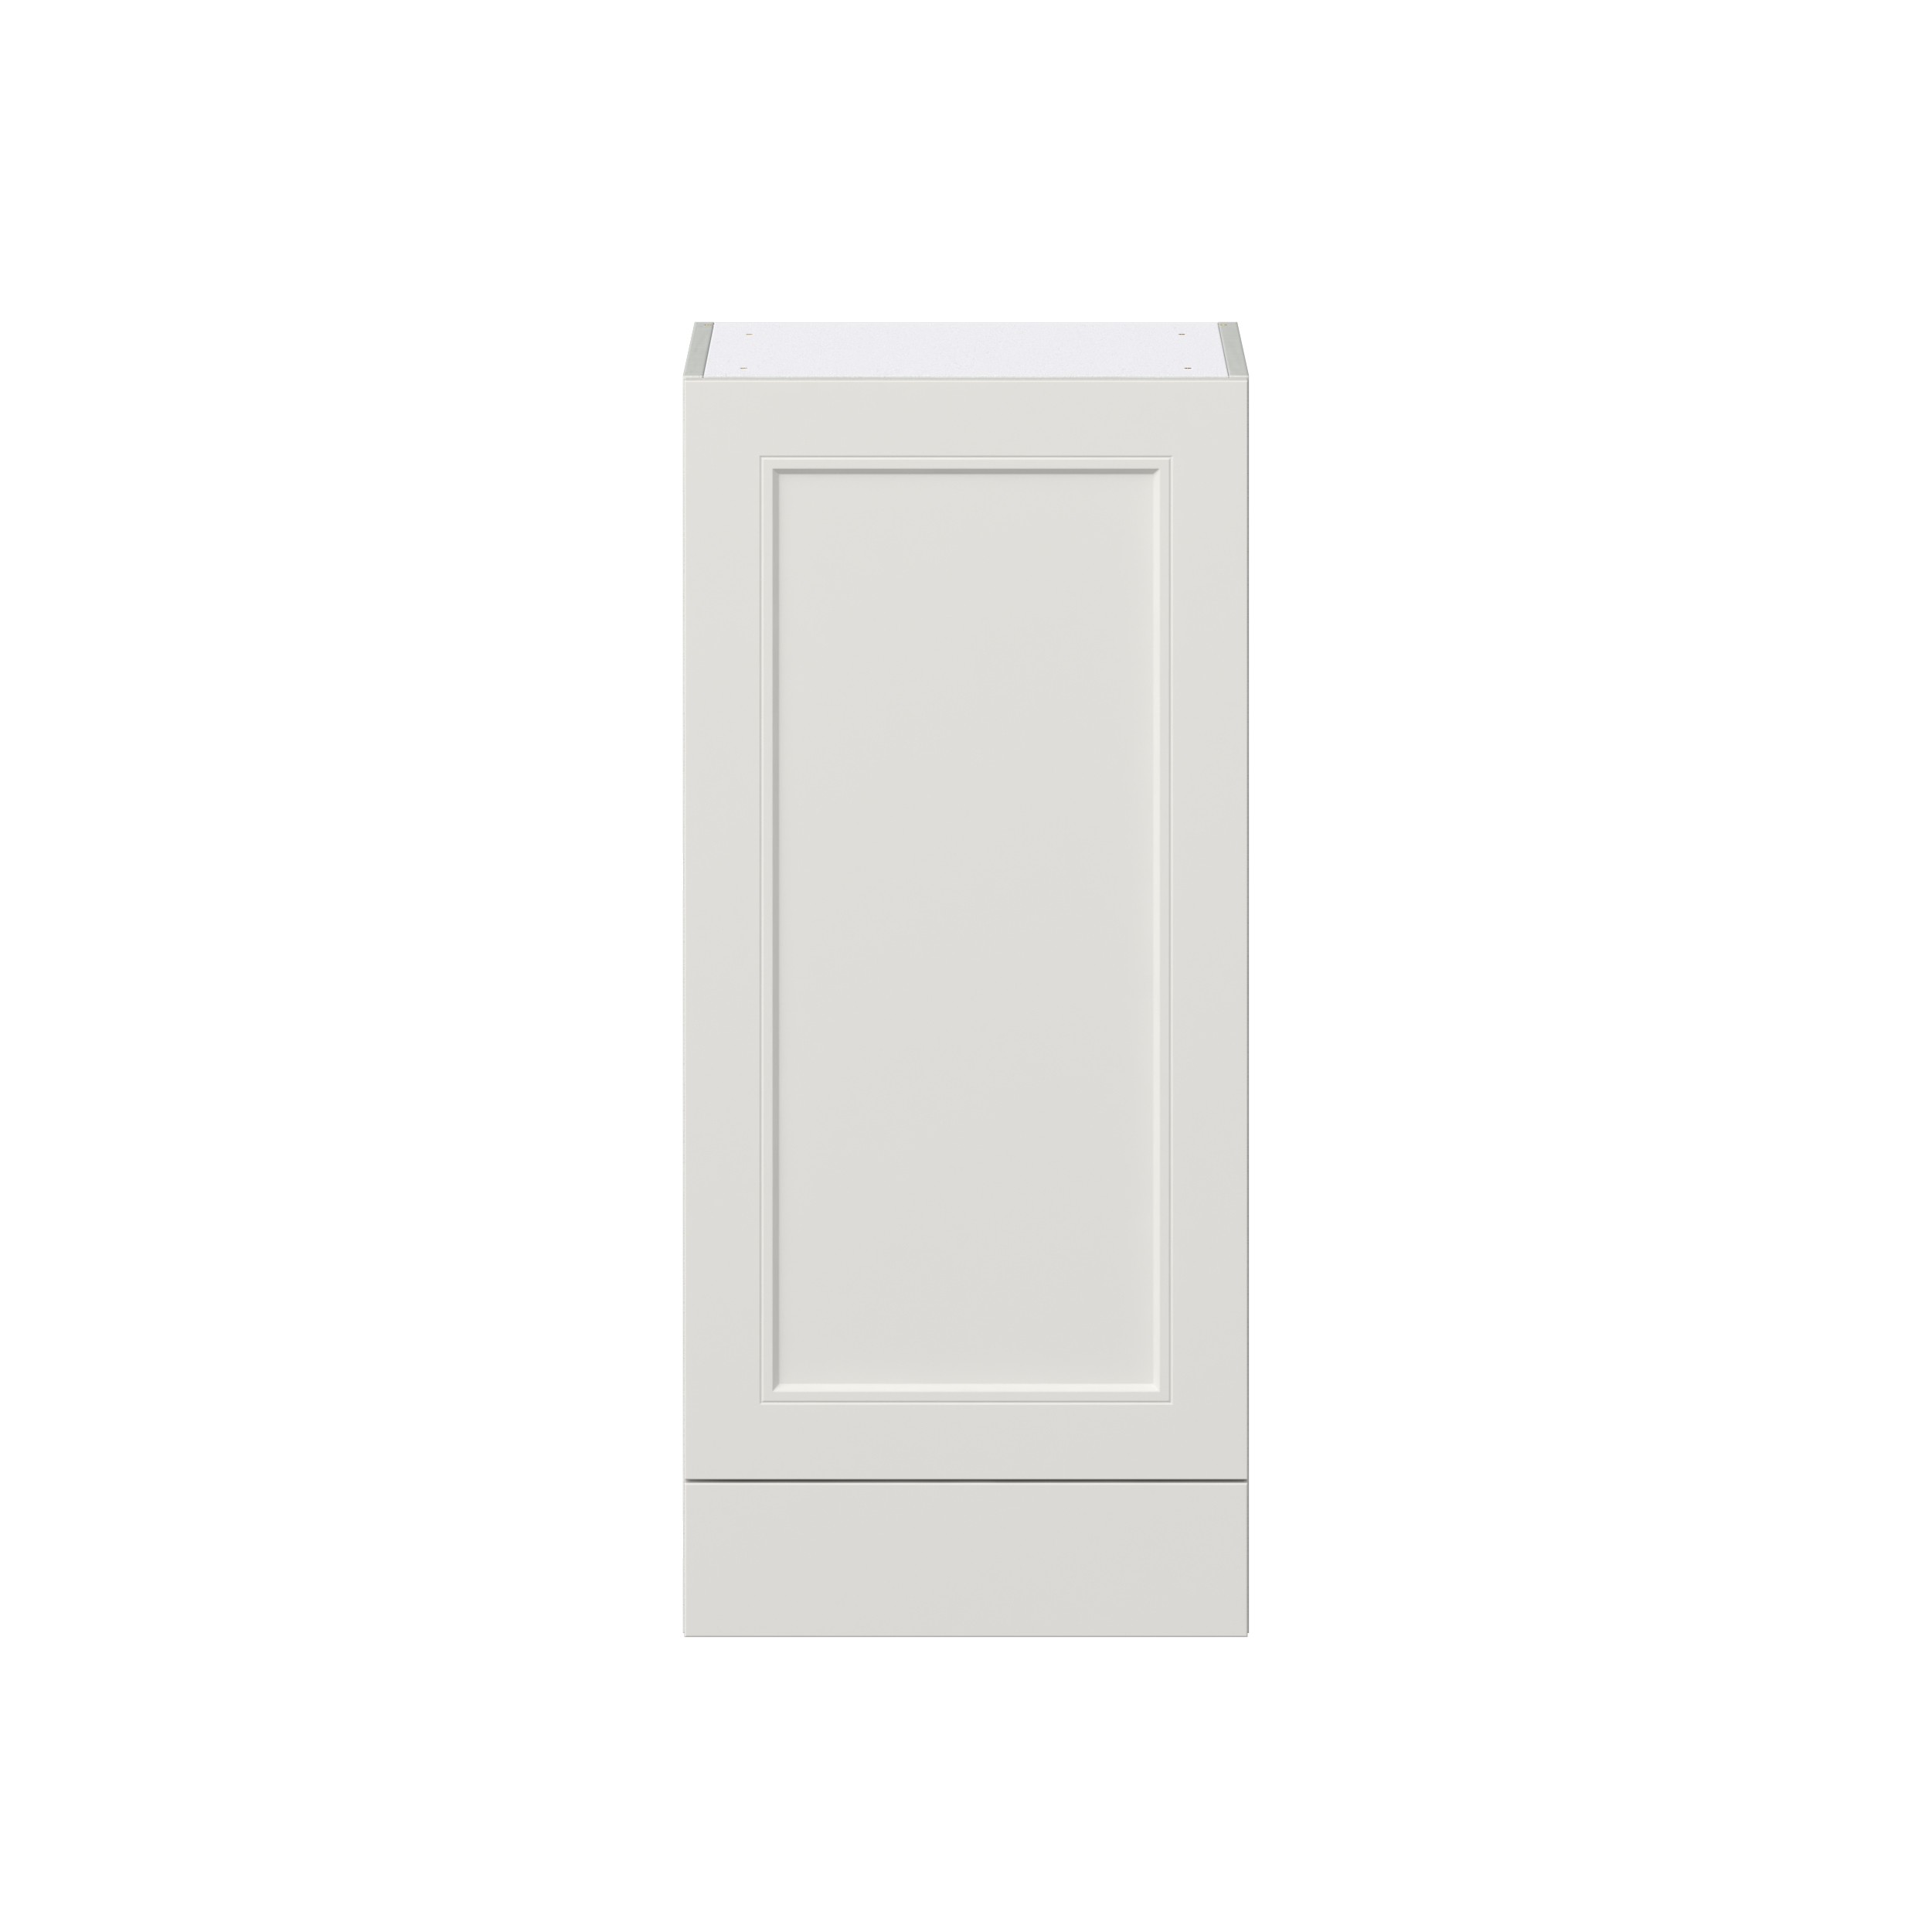 Wisteria Painted Light Gray Recessed Assembled Wall Cabinet with a Door and a 5 in. Drawer (18 in. W x 40 in. H x 14 in. D)